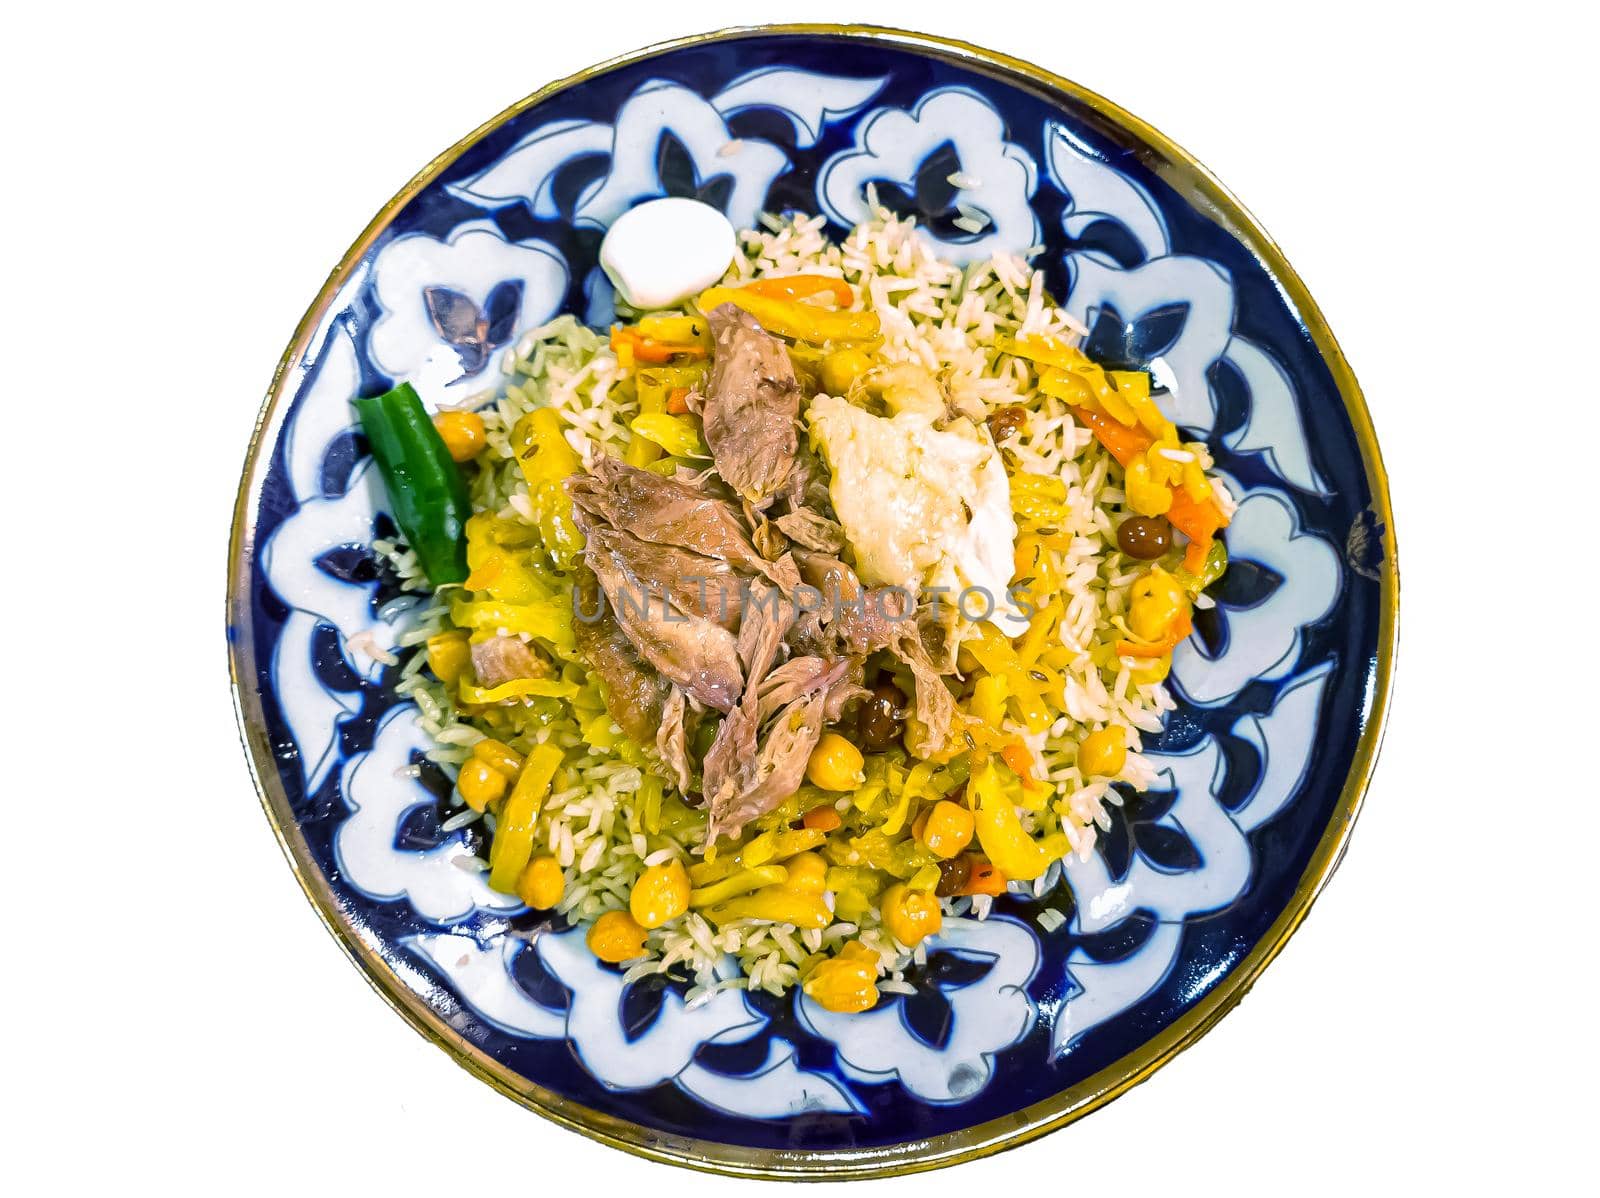 Traditional Uzbek pilaf from Samarkand. Meat, vegetables and rice are not mixed and laid out in layers by Milanchikov